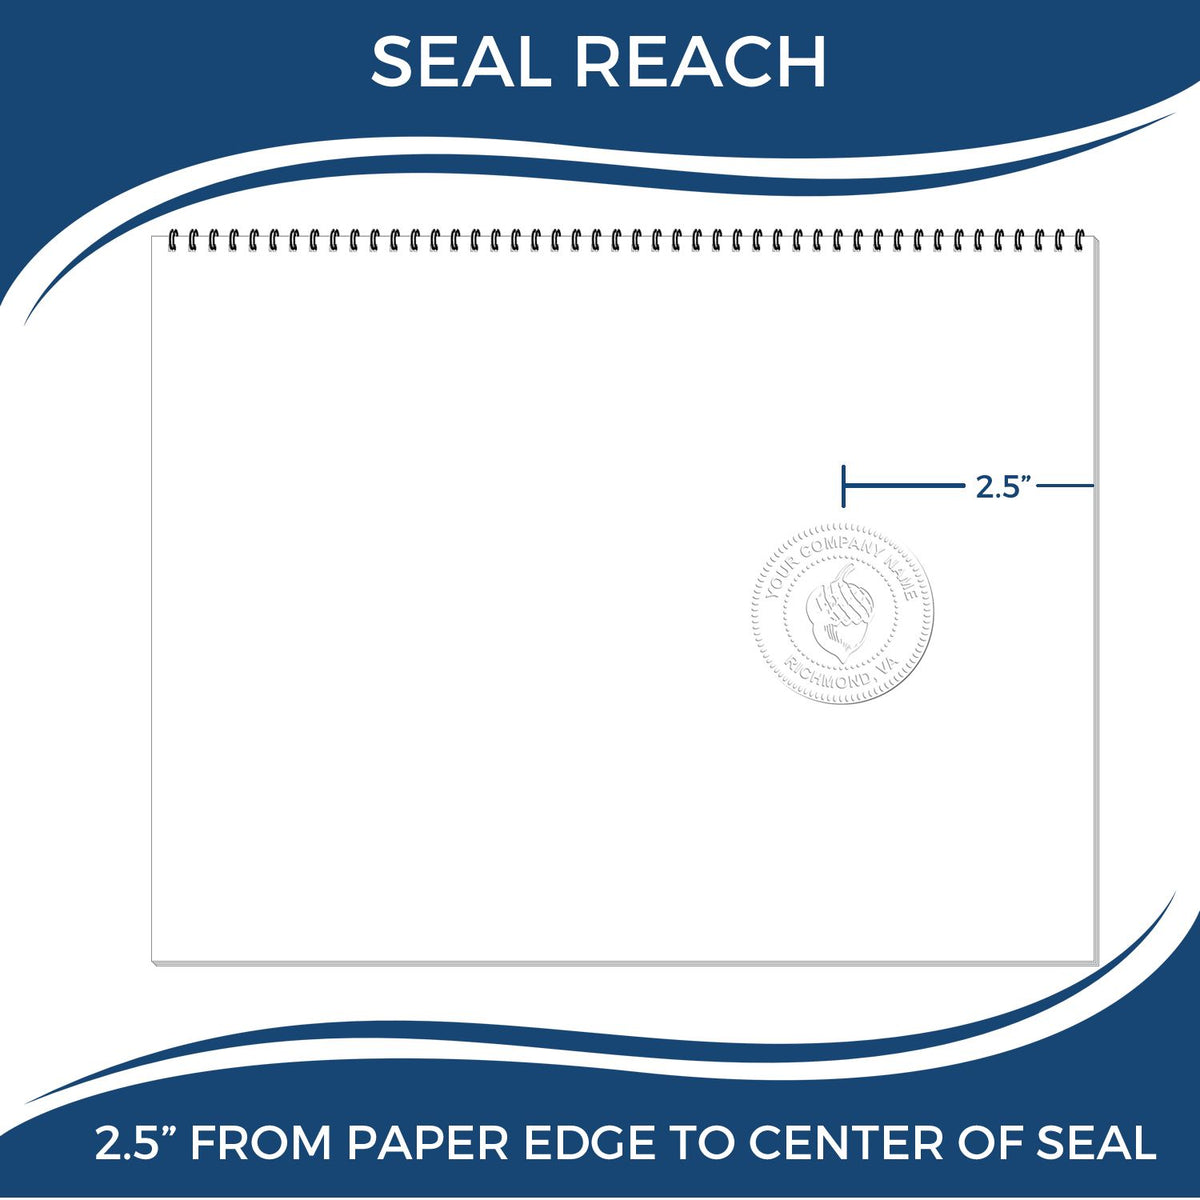 An infographic showing the seal reach which is represented by a ruler and a miniature seal image of the Long Reach Minnesota Land Surveyor Seal